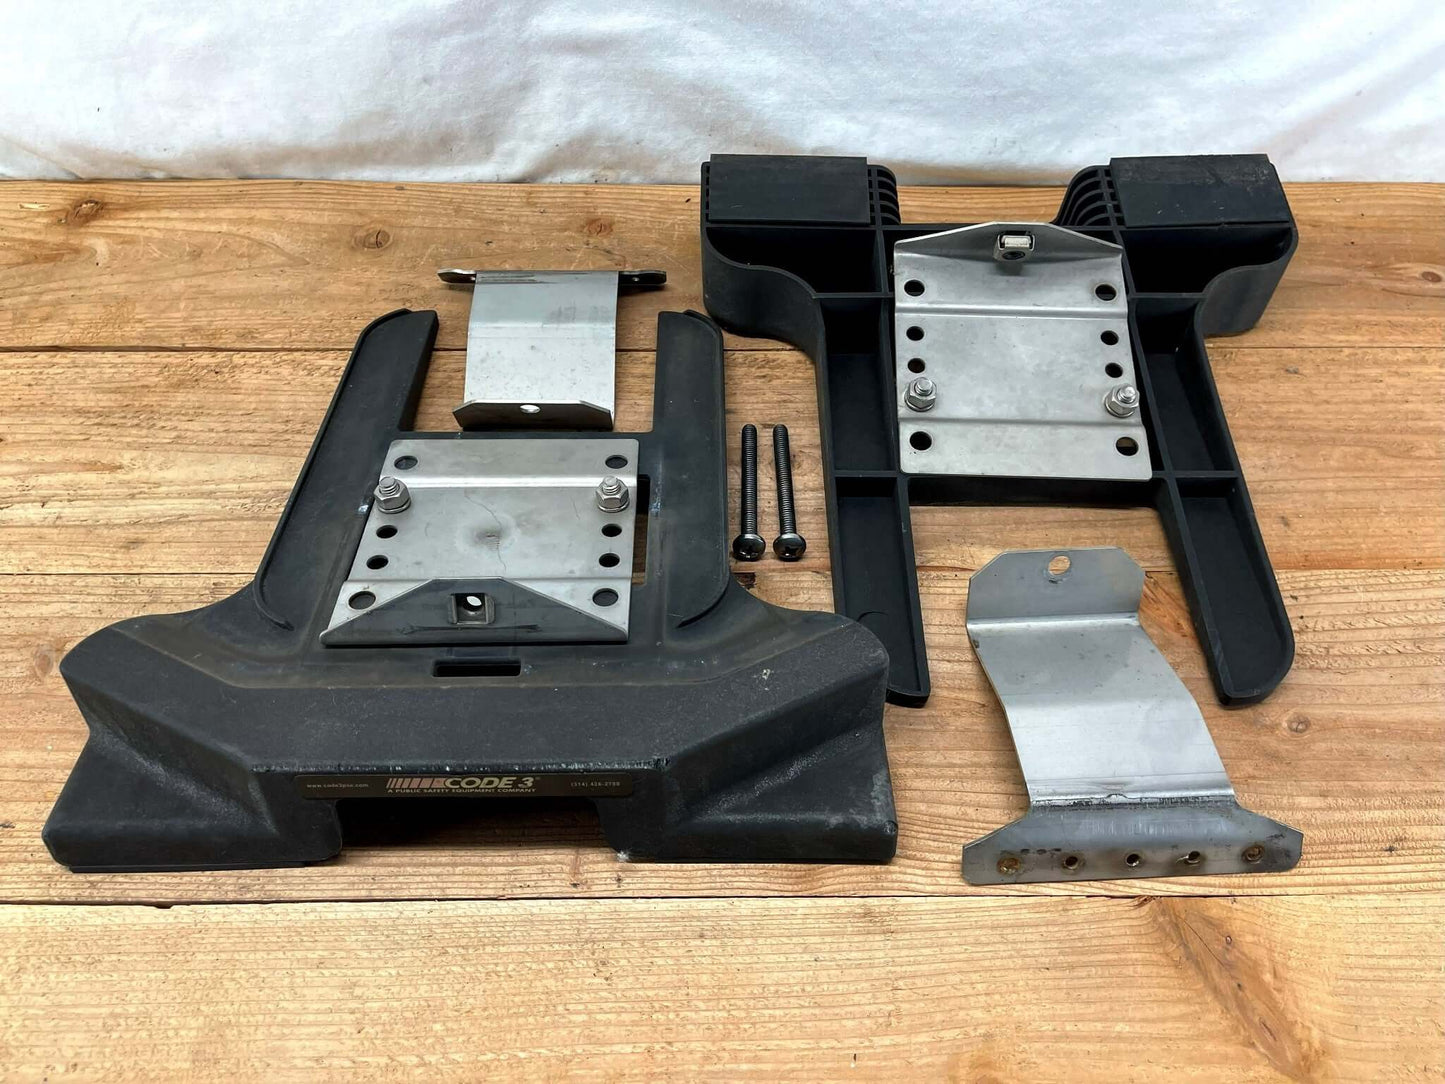 CODE 3 2100 2500 2700 MX7000 Excalibur  - Pair Mounting Feet with Hardware